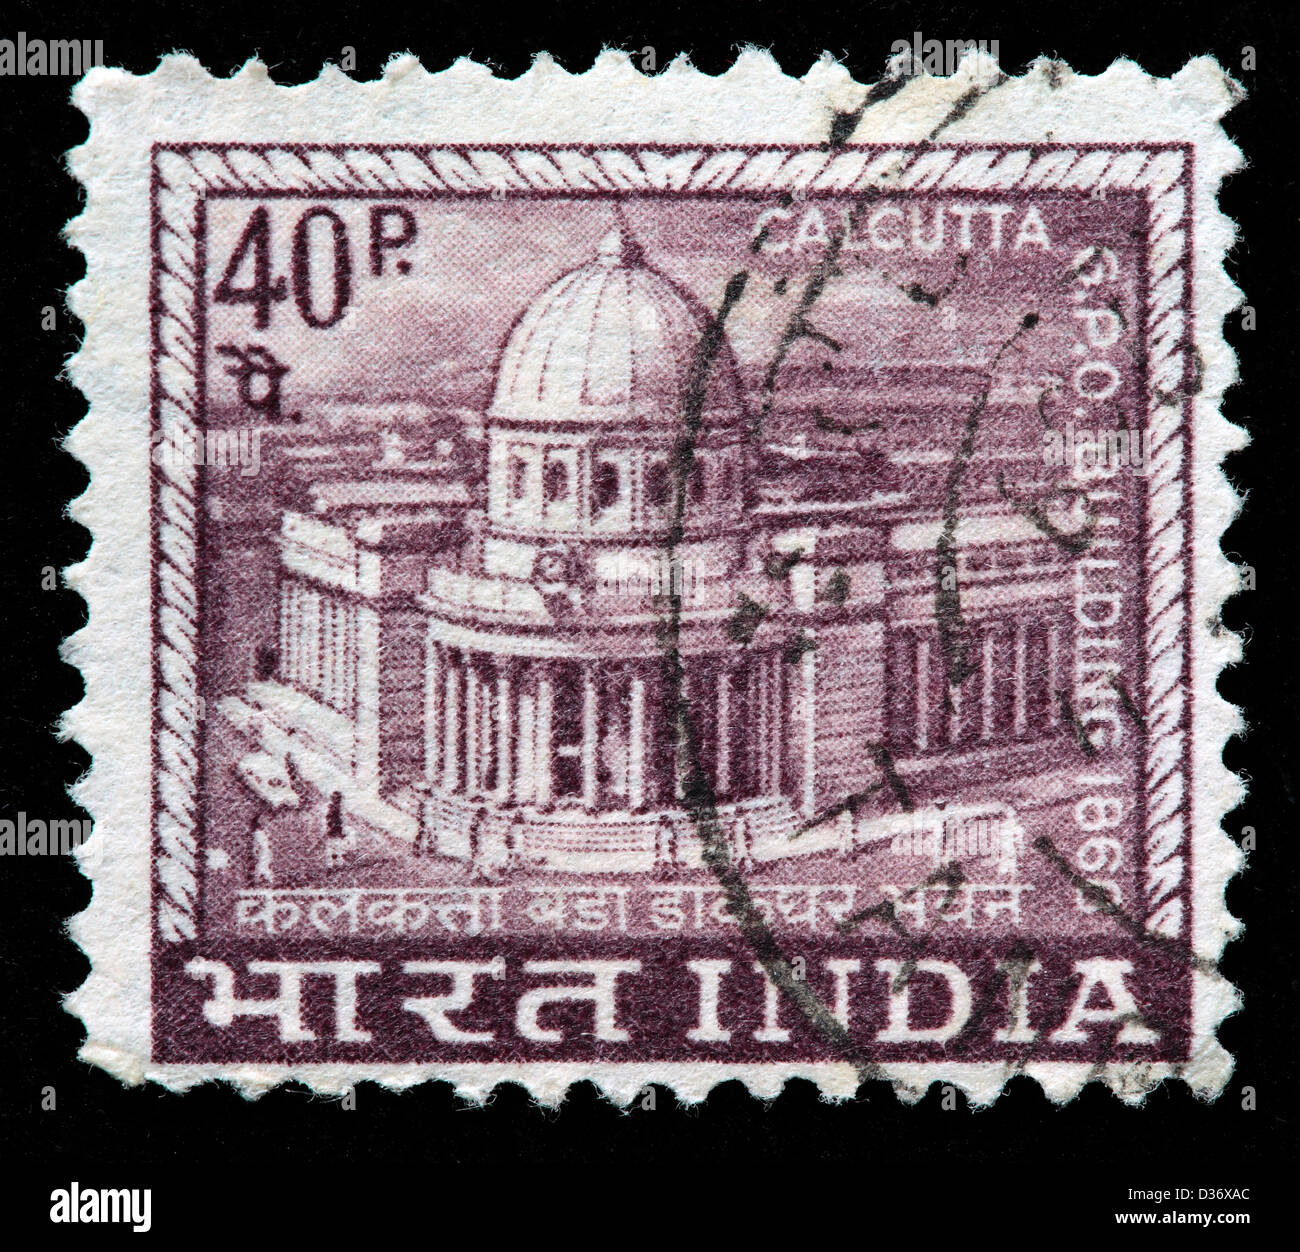 General post office, Calcutta, postage stamp, India, 1965 Stock Photo